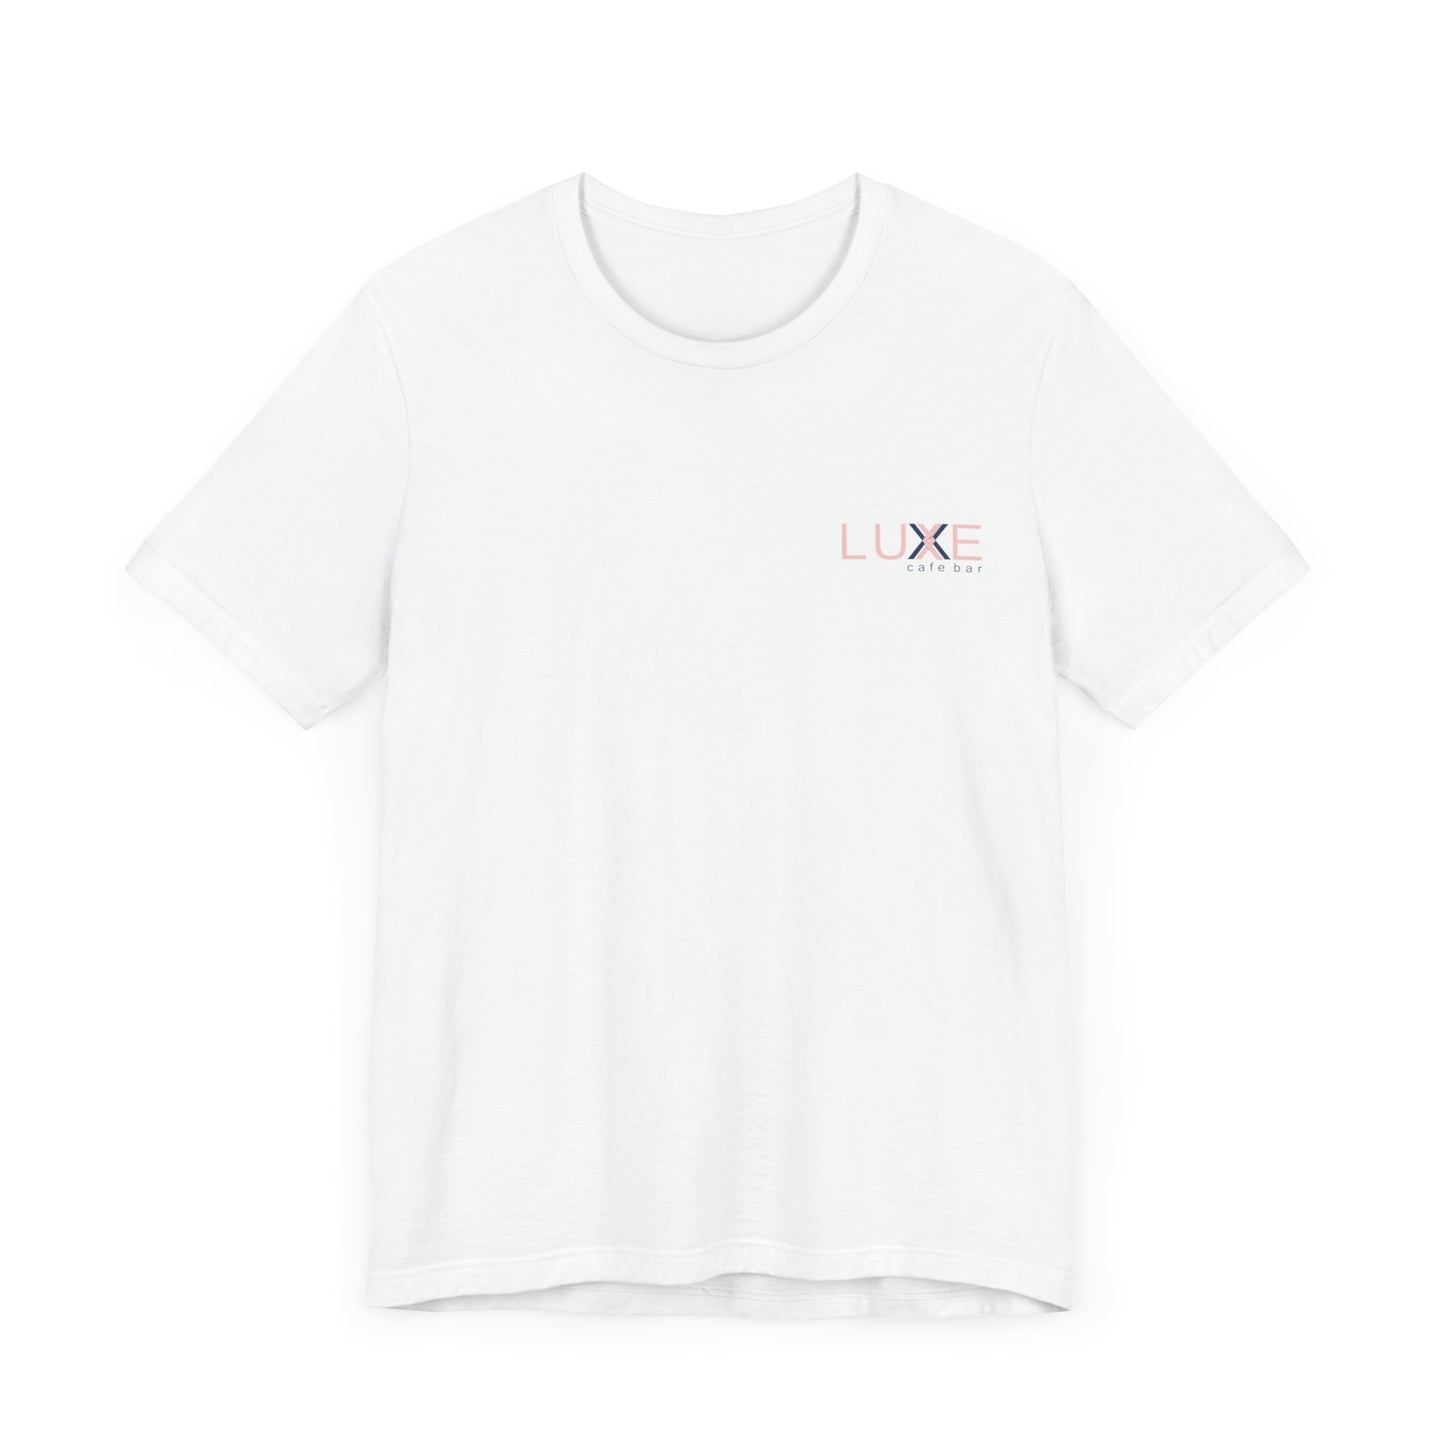 Does This Come in Pink? Backprint Short Sleeve Tee